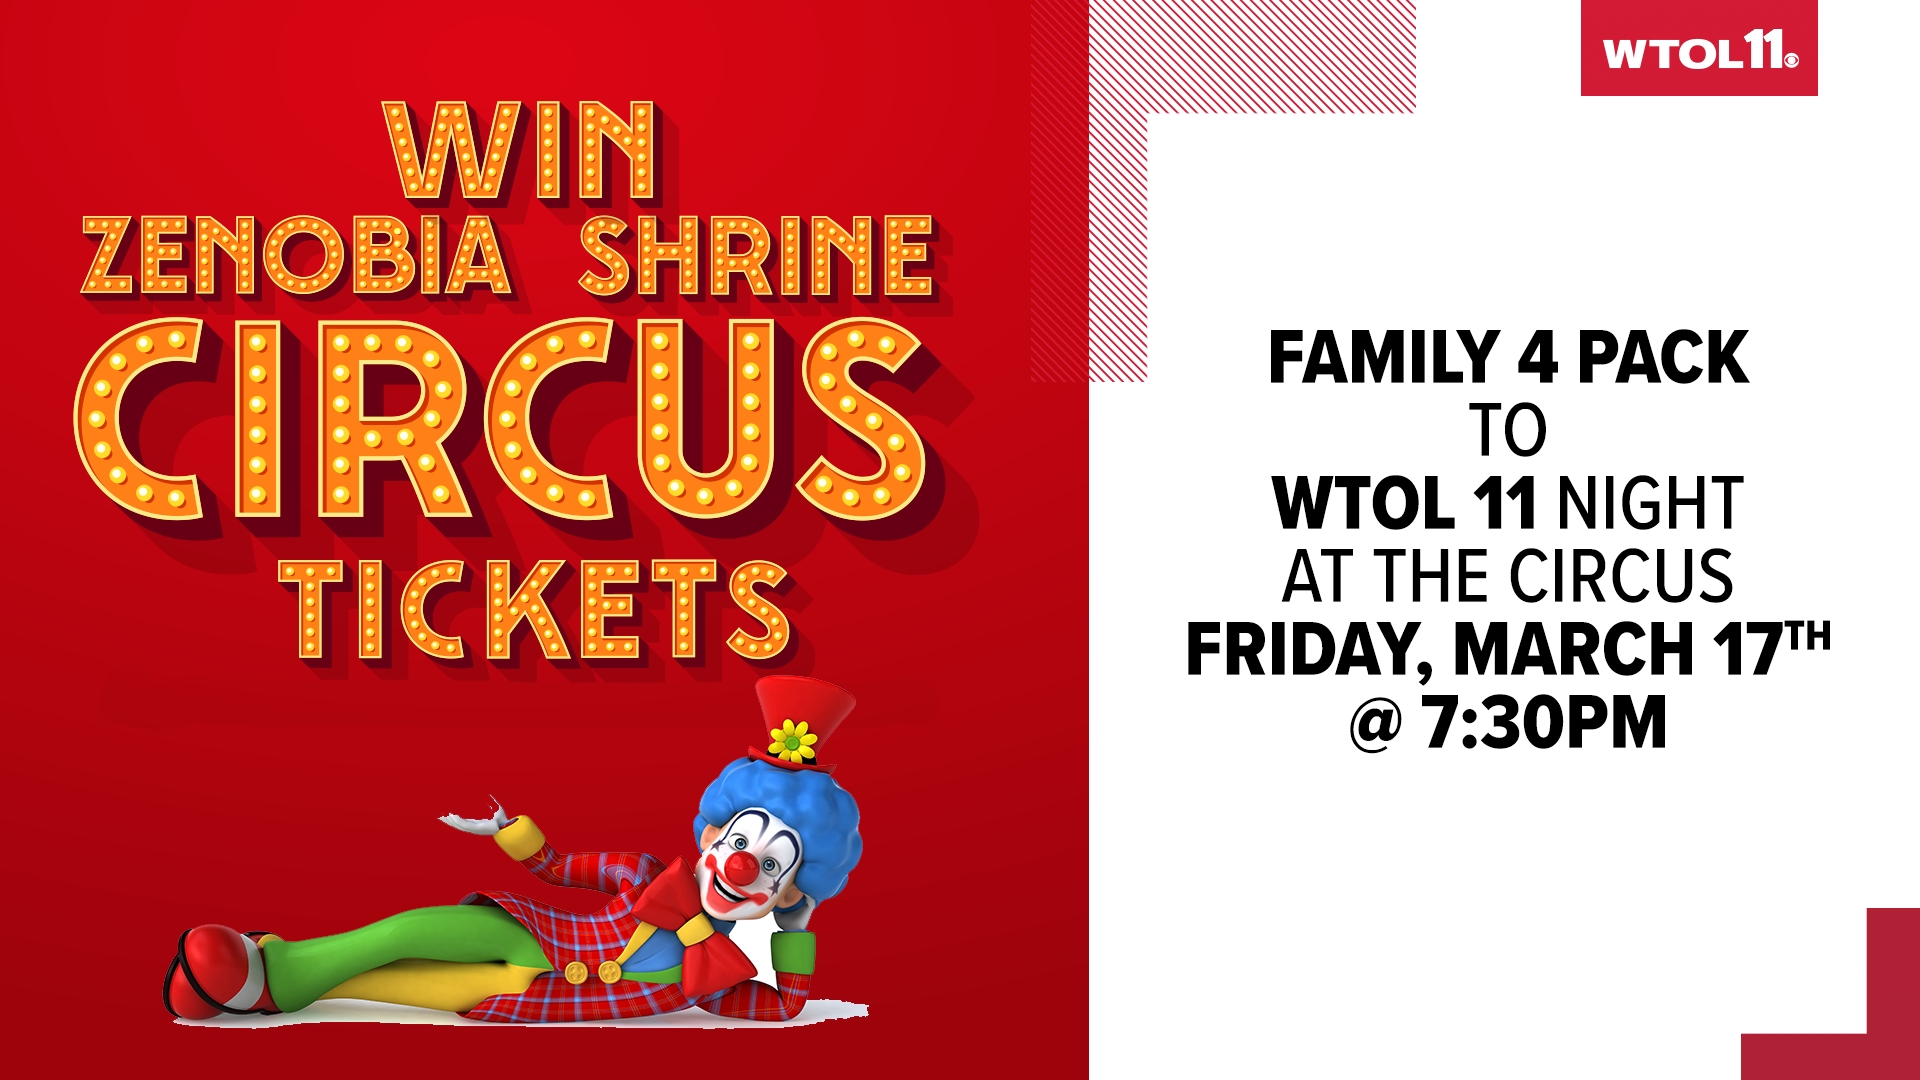 Win tickets to the Shrine Circus!